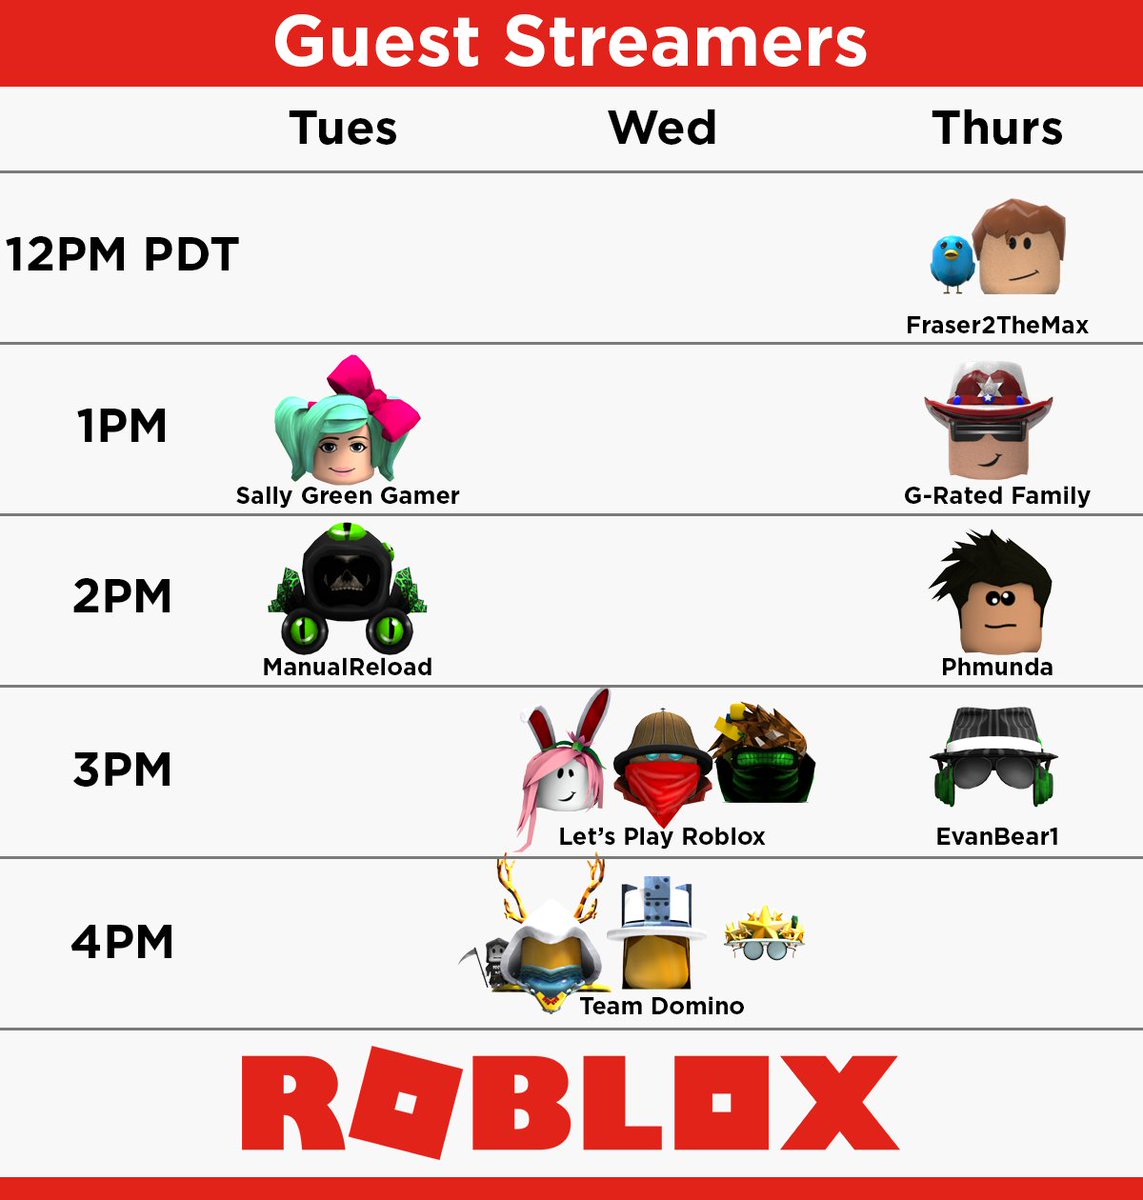 Roblox On Twitter This Tues Thurs Our Guest Streamers Will Blow